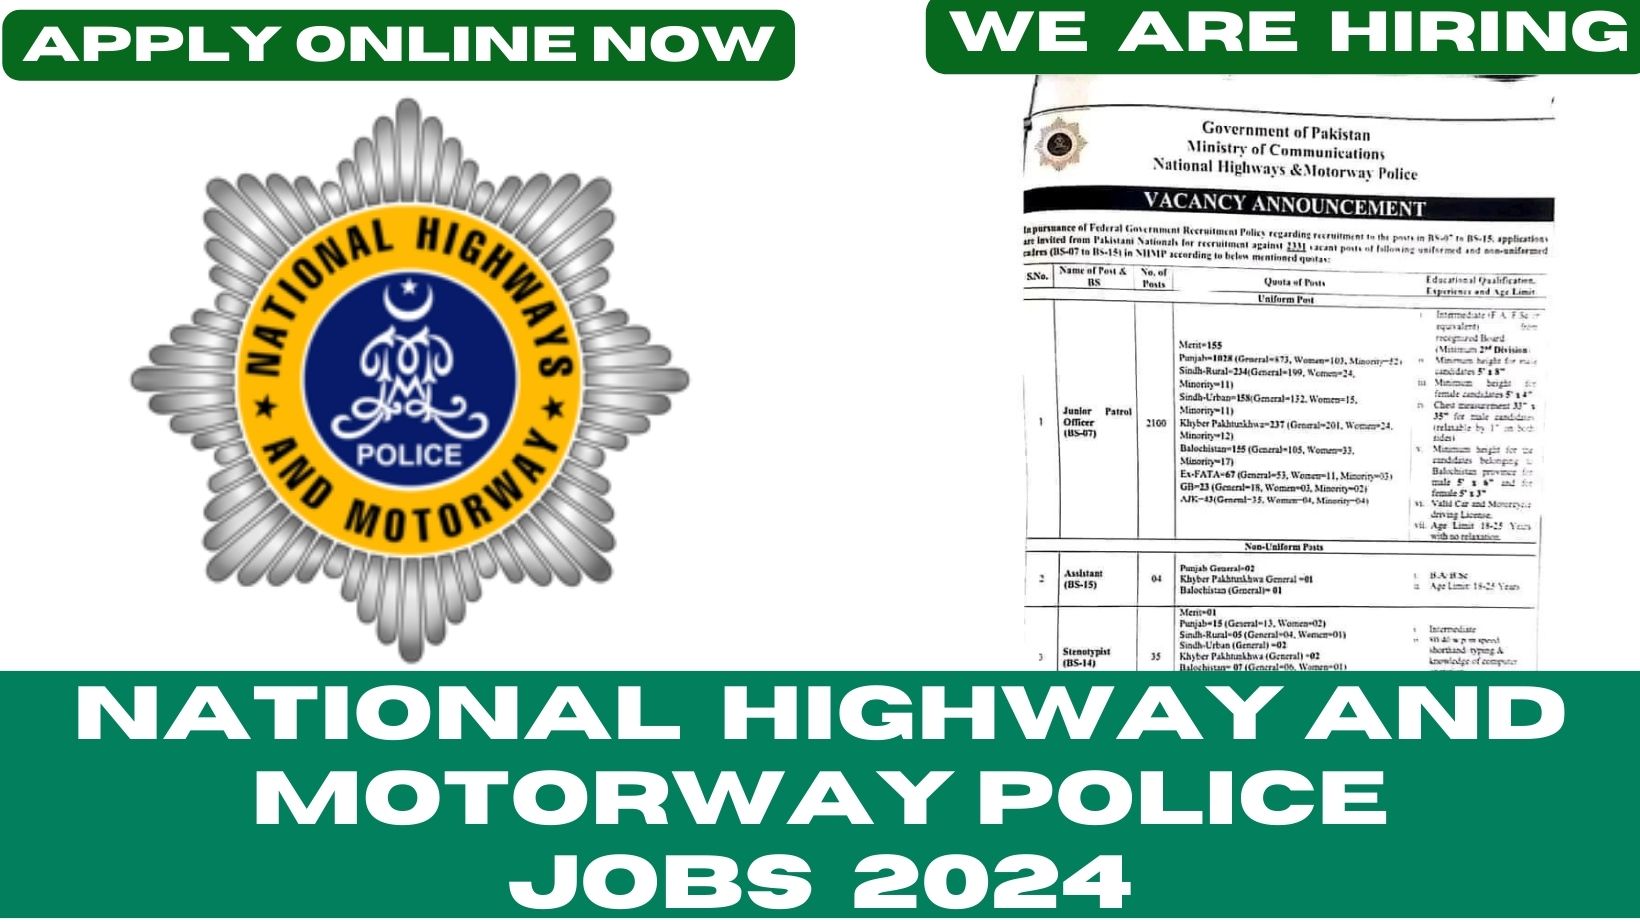 NATIONAL HIGHWAY AND MOTORWAY POLICE JOBS 2024 | APPLY NOW AT NHMP.GOV.PK